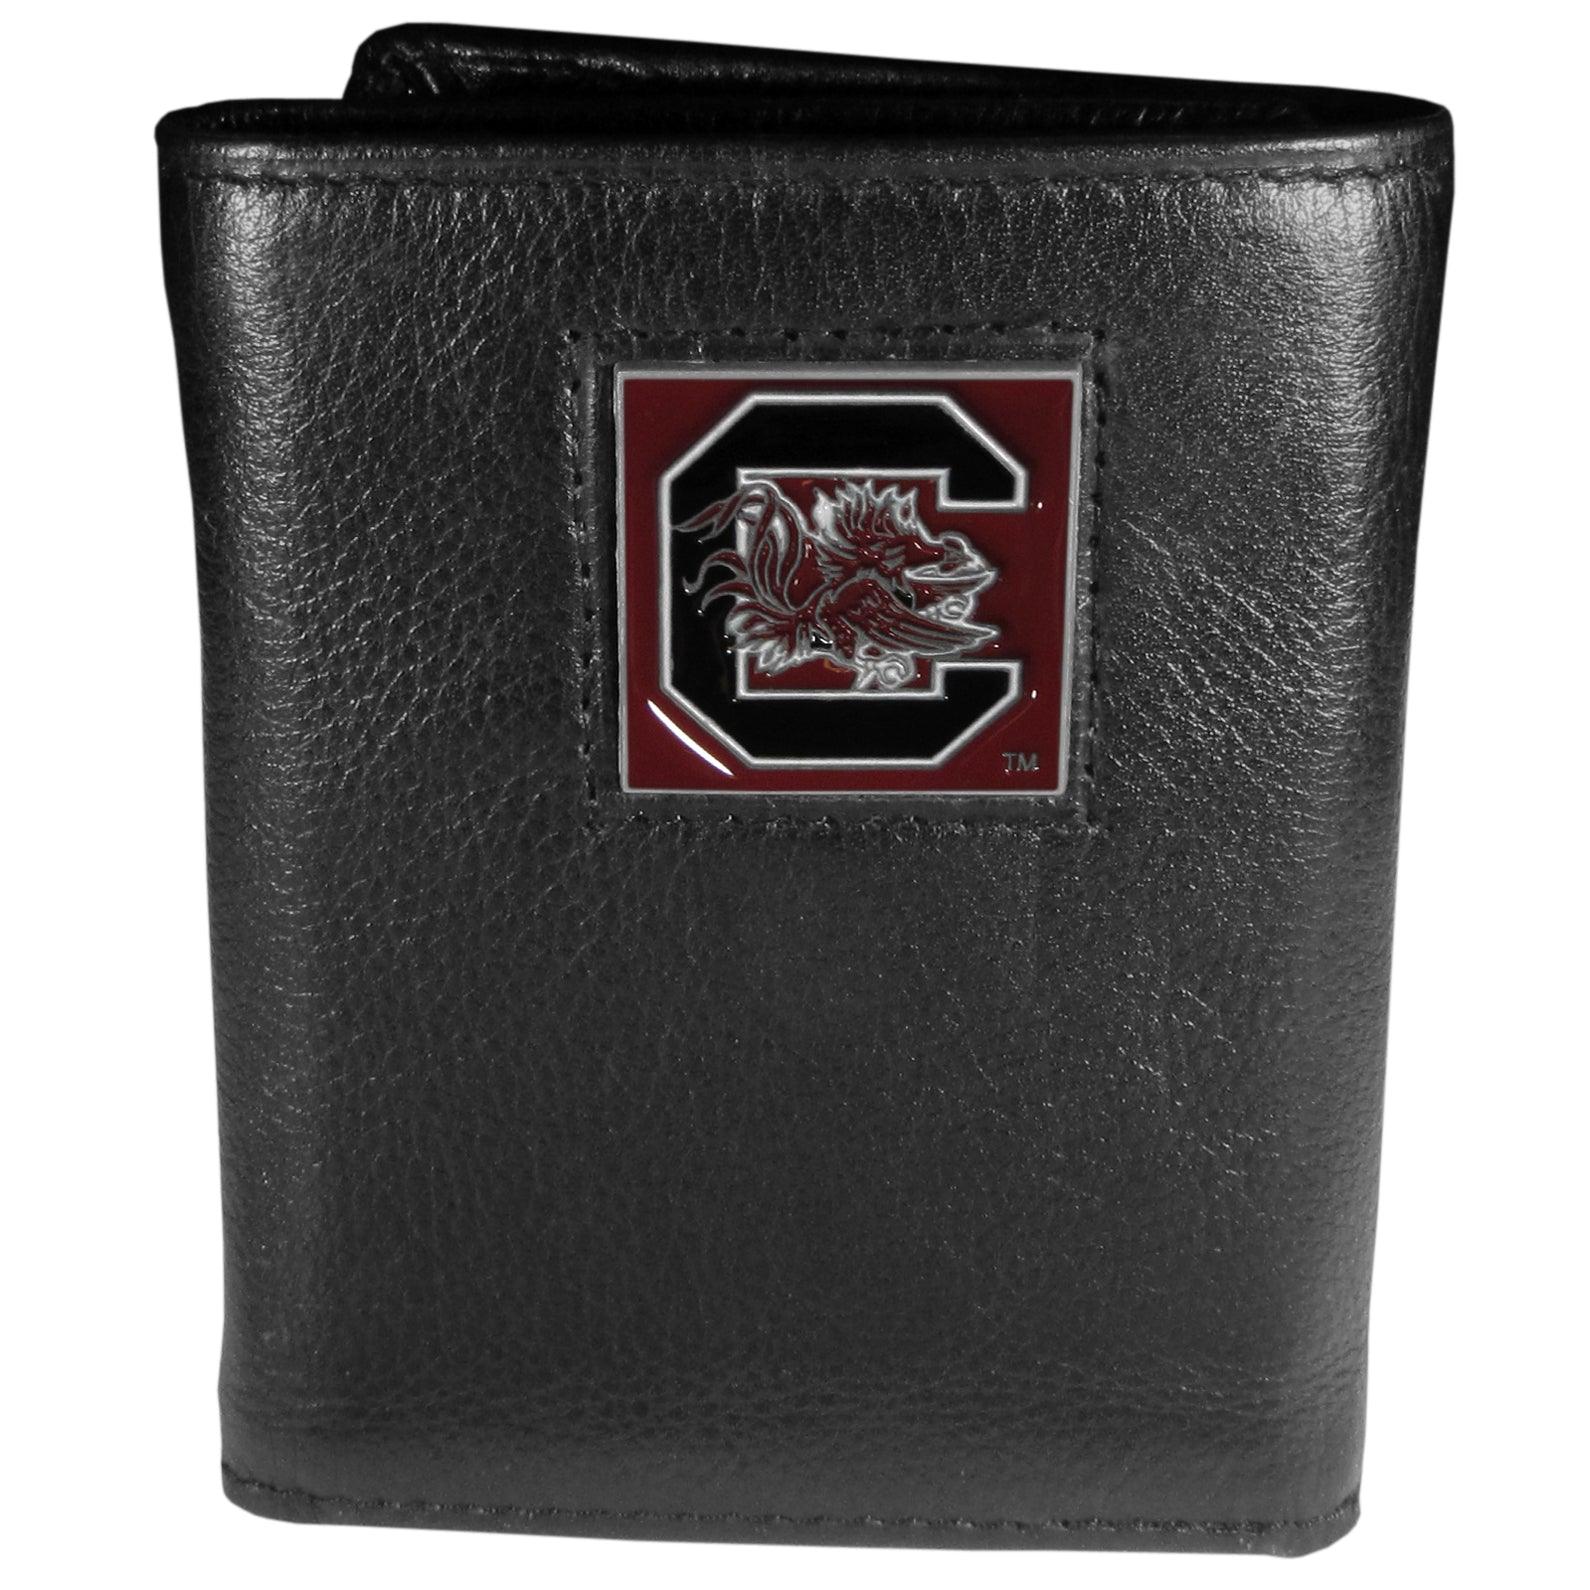 S. Carolina Gamecocks Deluxe Leather Tri-fold Wallet Packaged in Gift Box - Flyclothing LLC